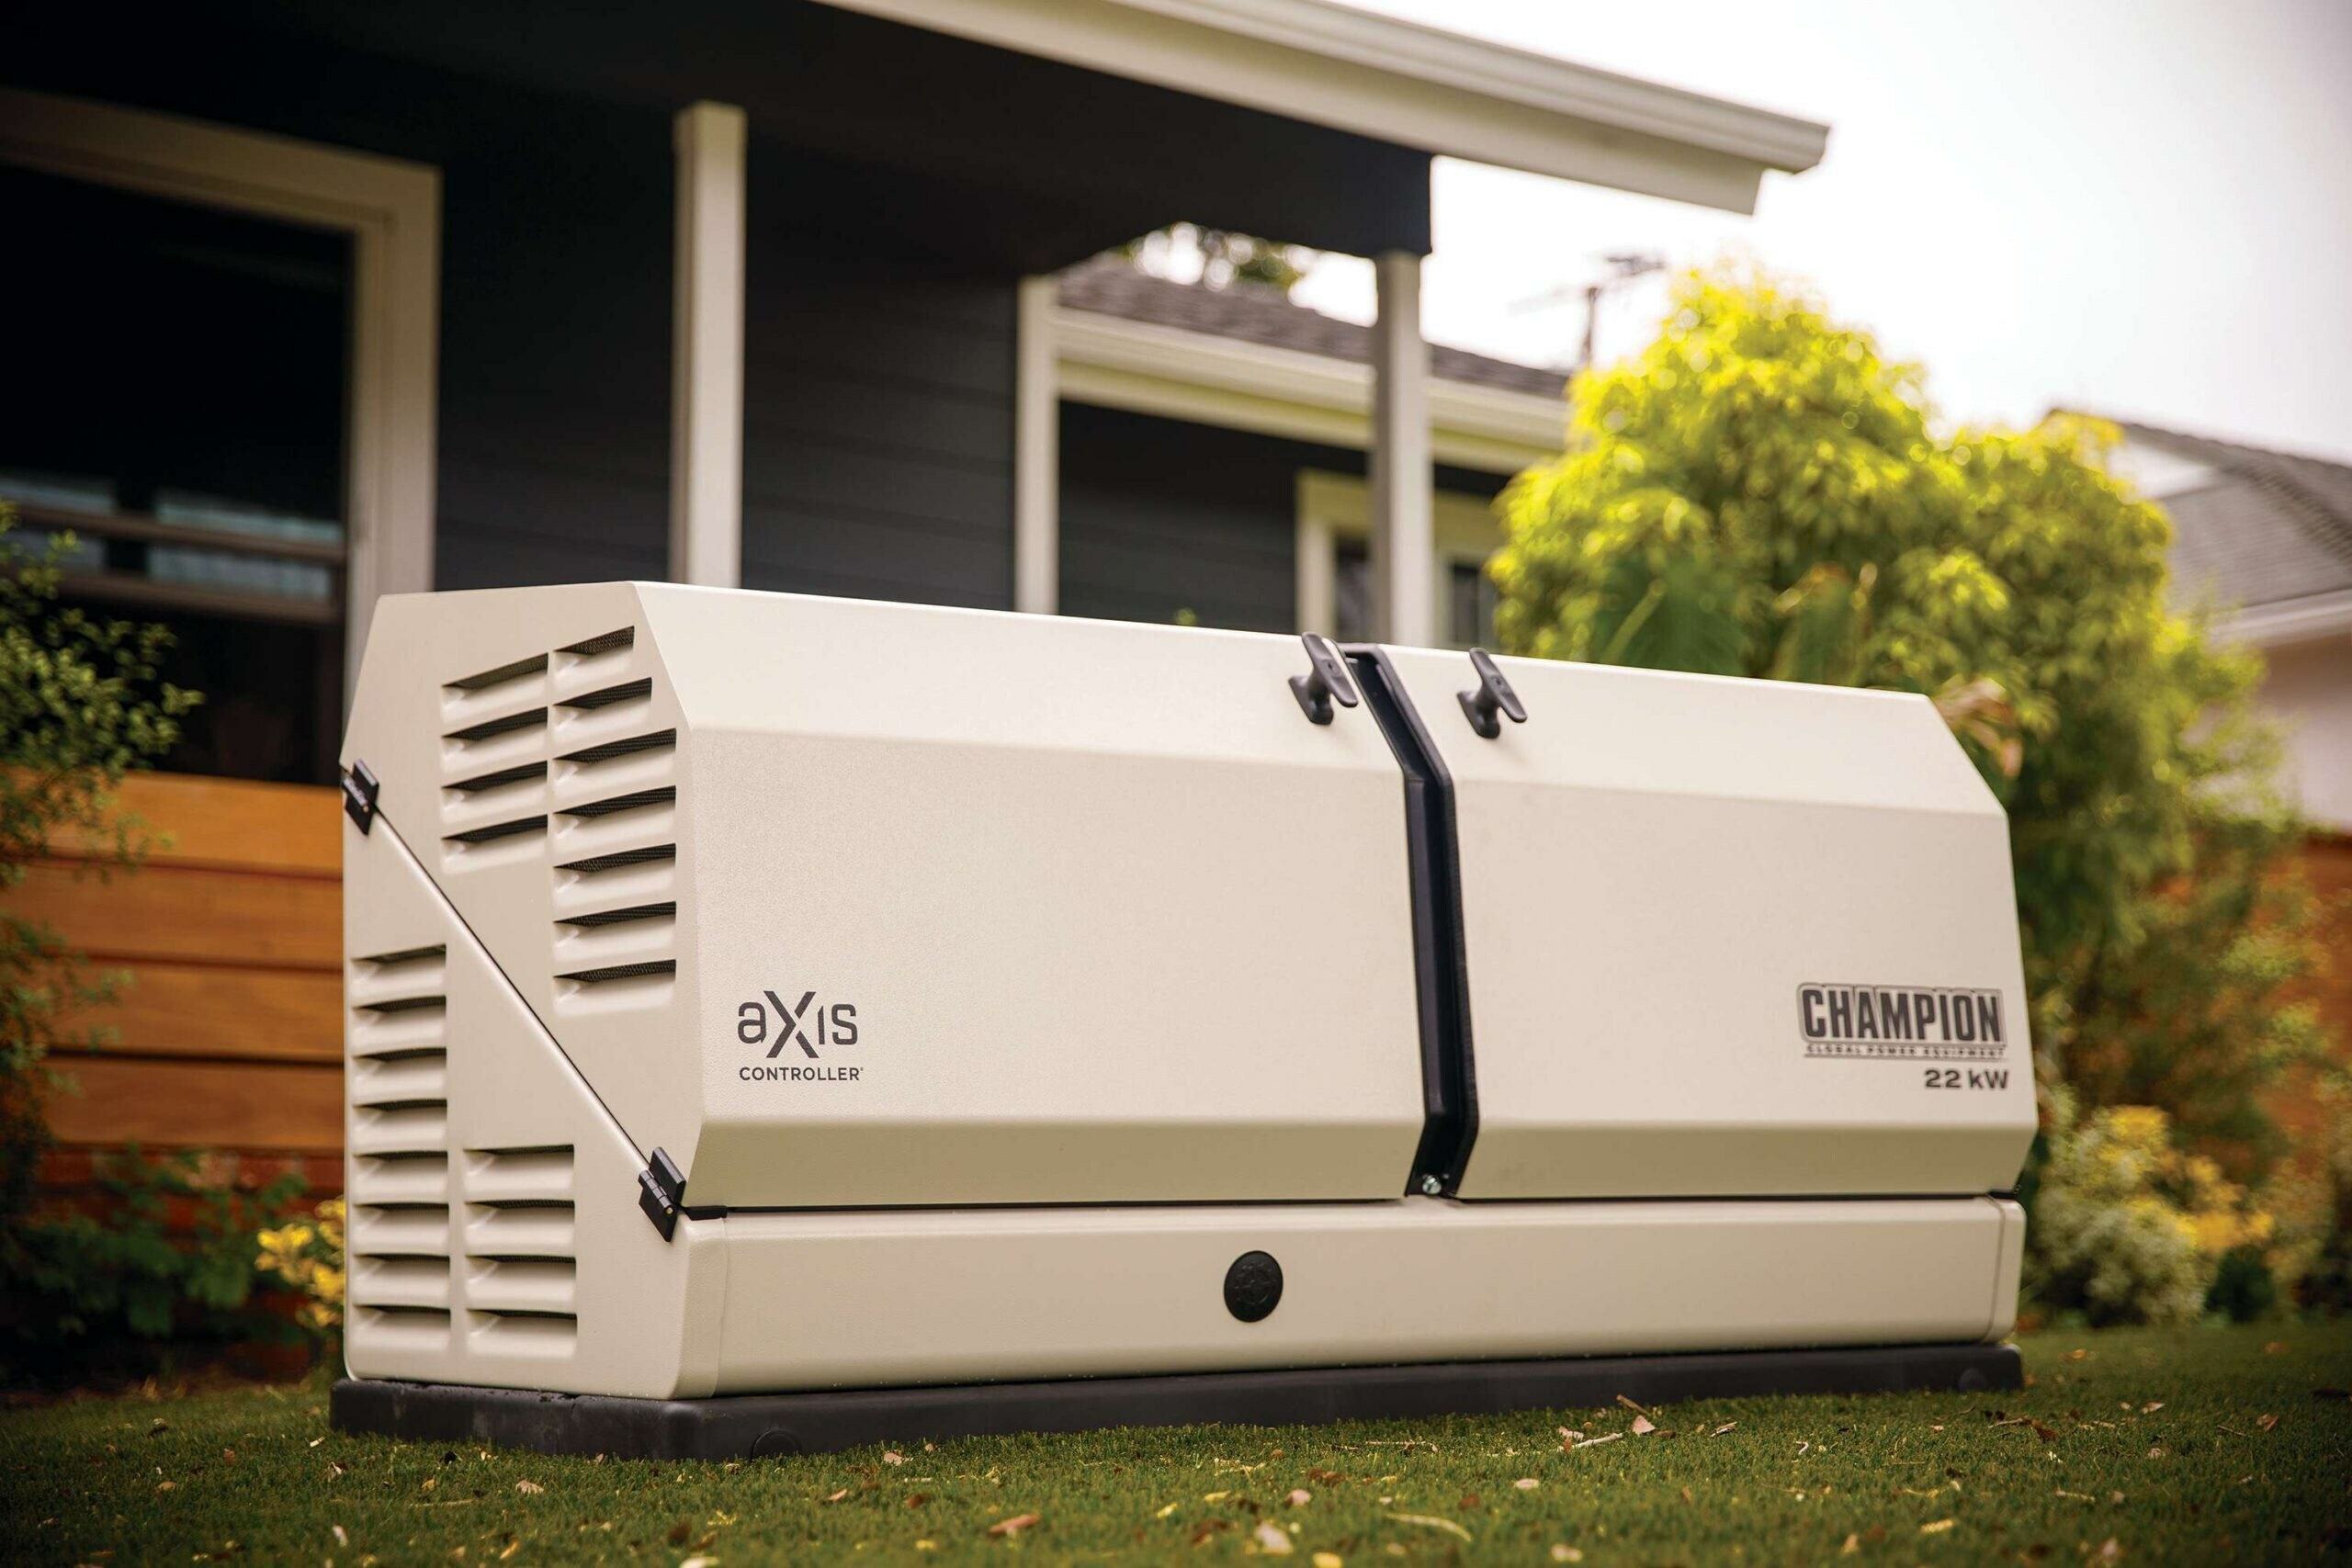 Champion 22kW Home Standby Generator Installed in the Backyard of a Home